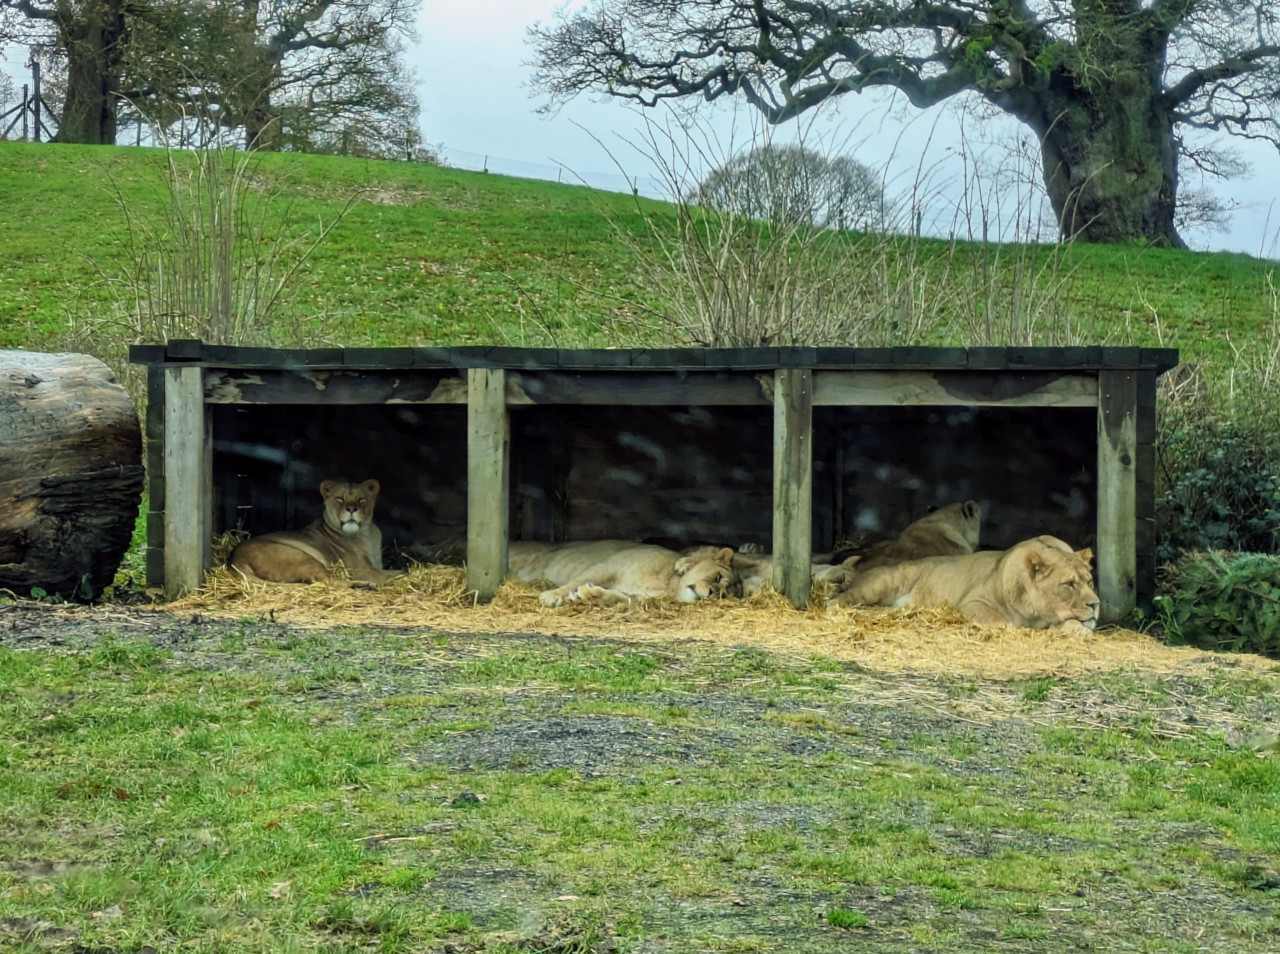 Five Lionesses in wooden shelter